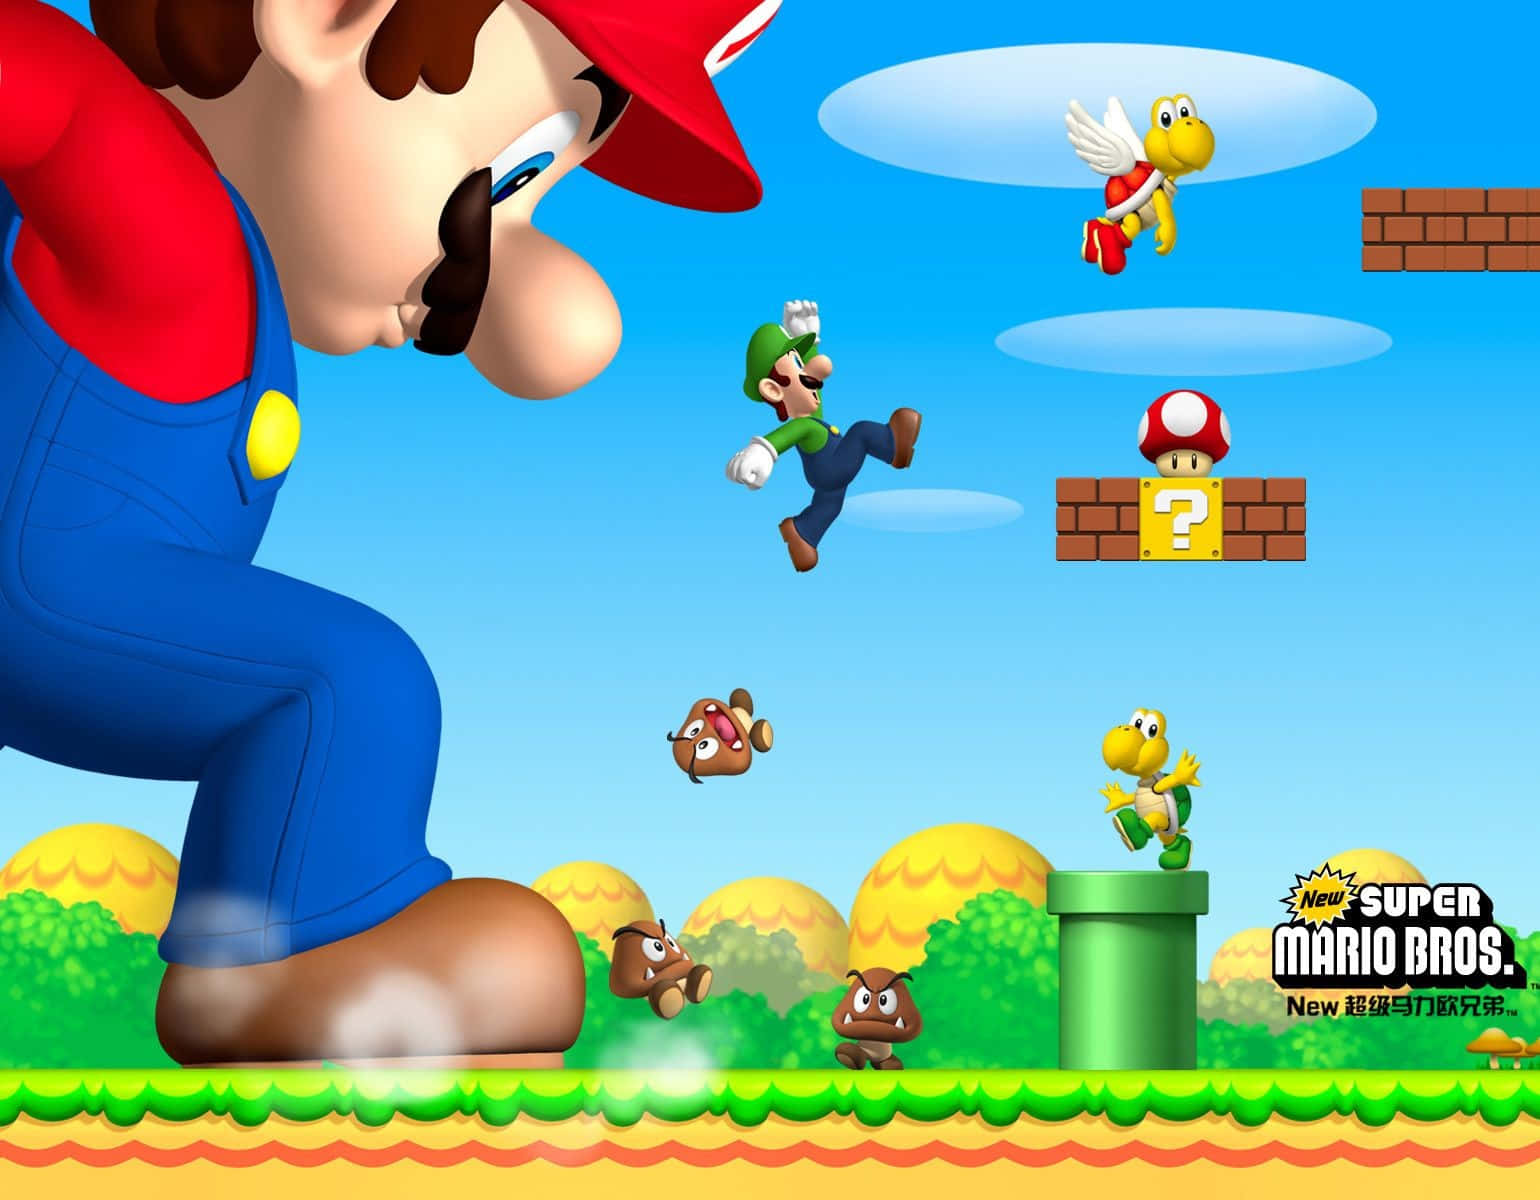 Join Mario and Luigi for an exciting adventure!